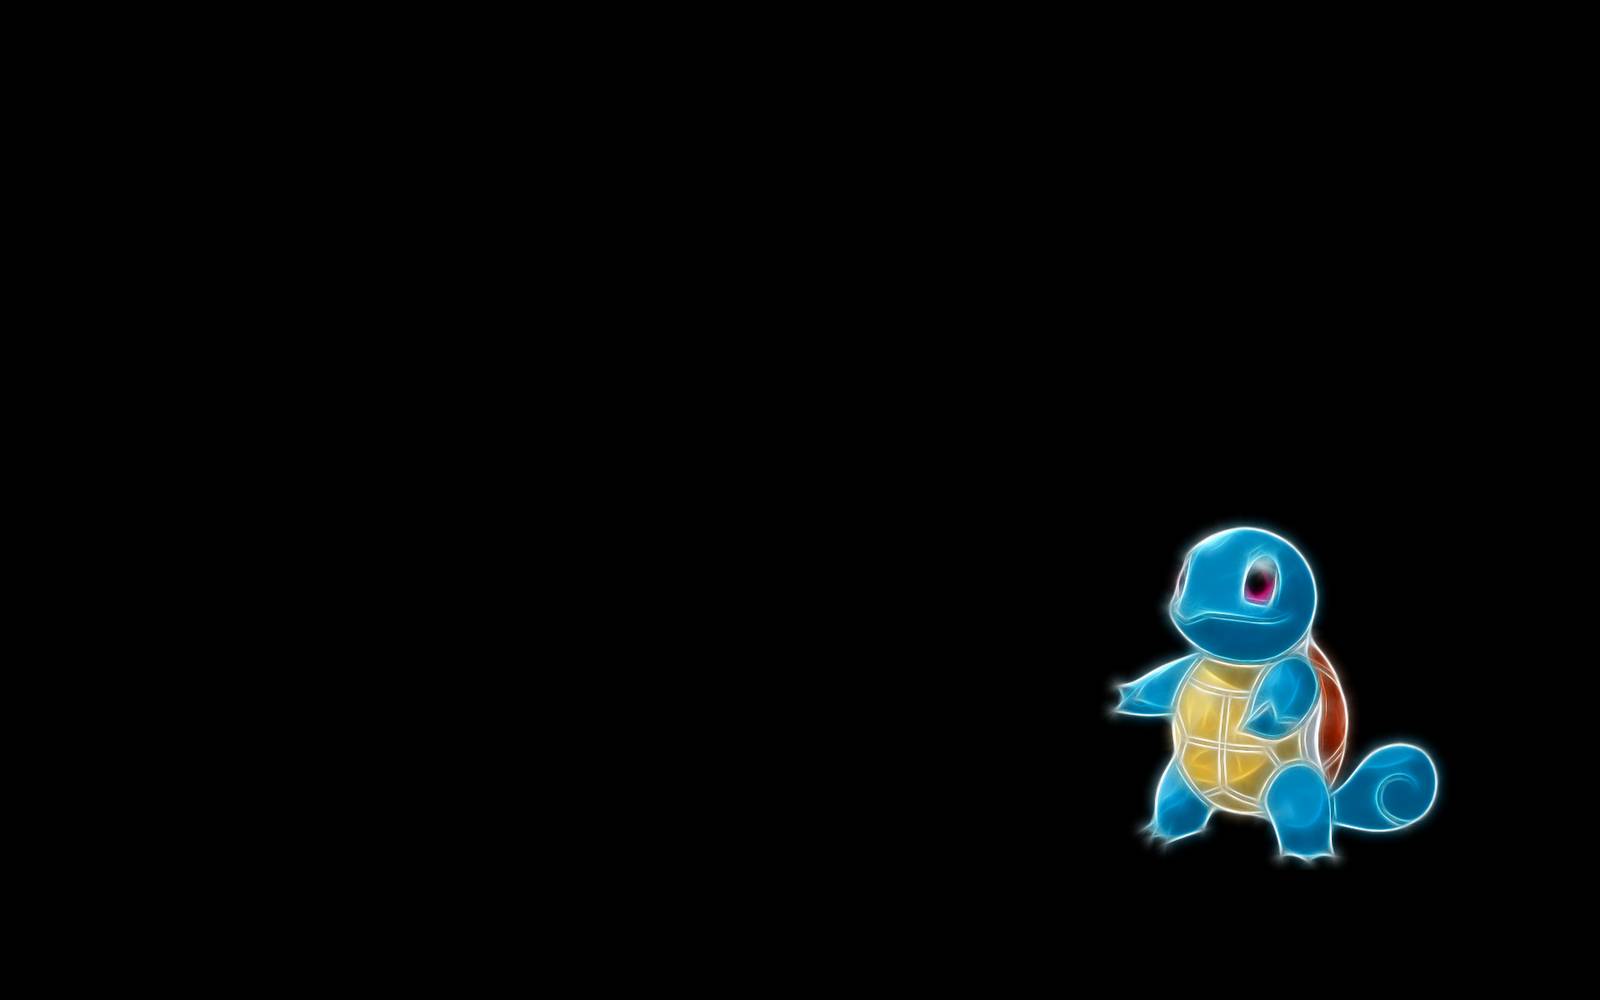 Squirtle Wallpaper Awesome Squirtle wallpaper 1600x1000